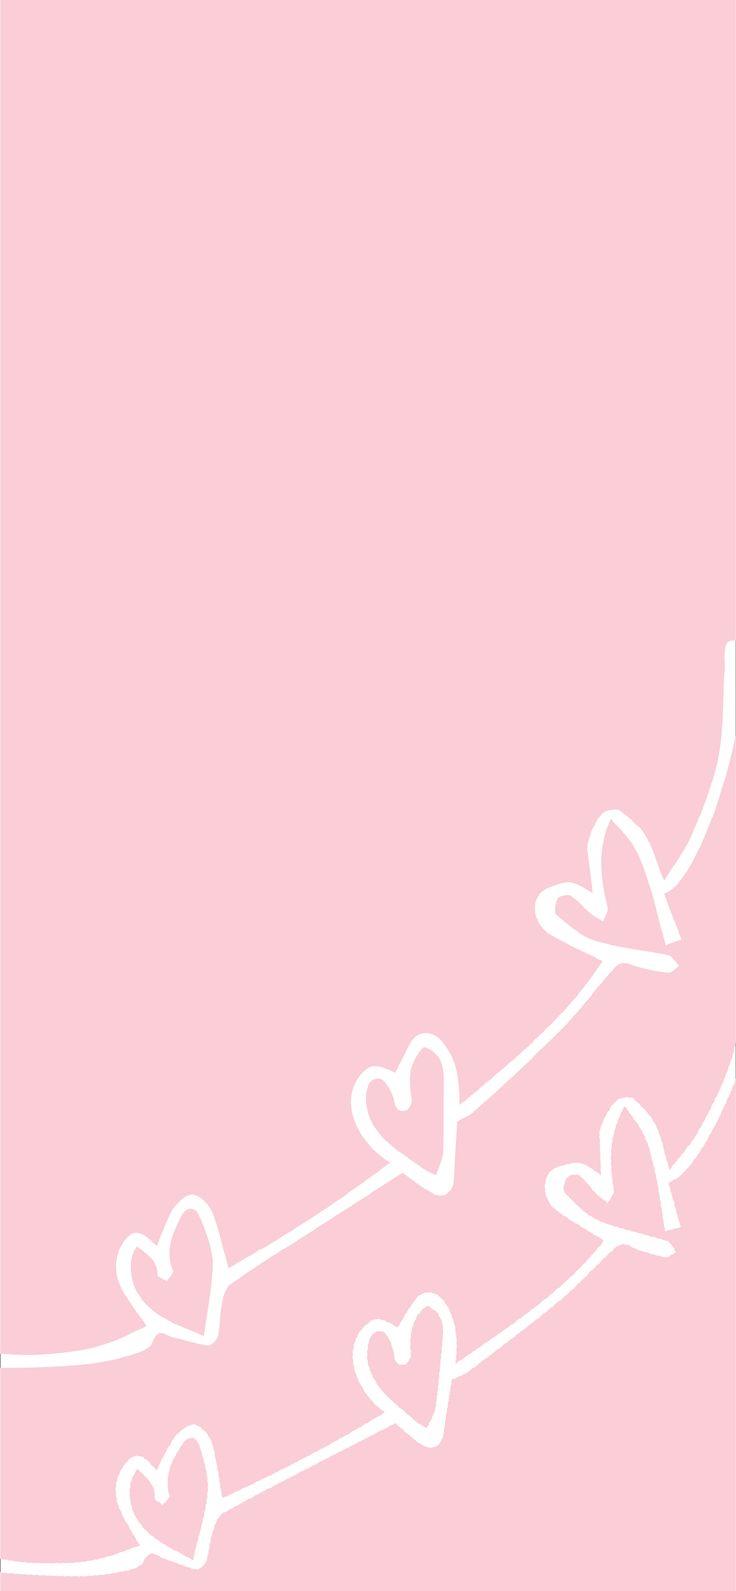 Valentines Heart Day iPhone Wallpaper